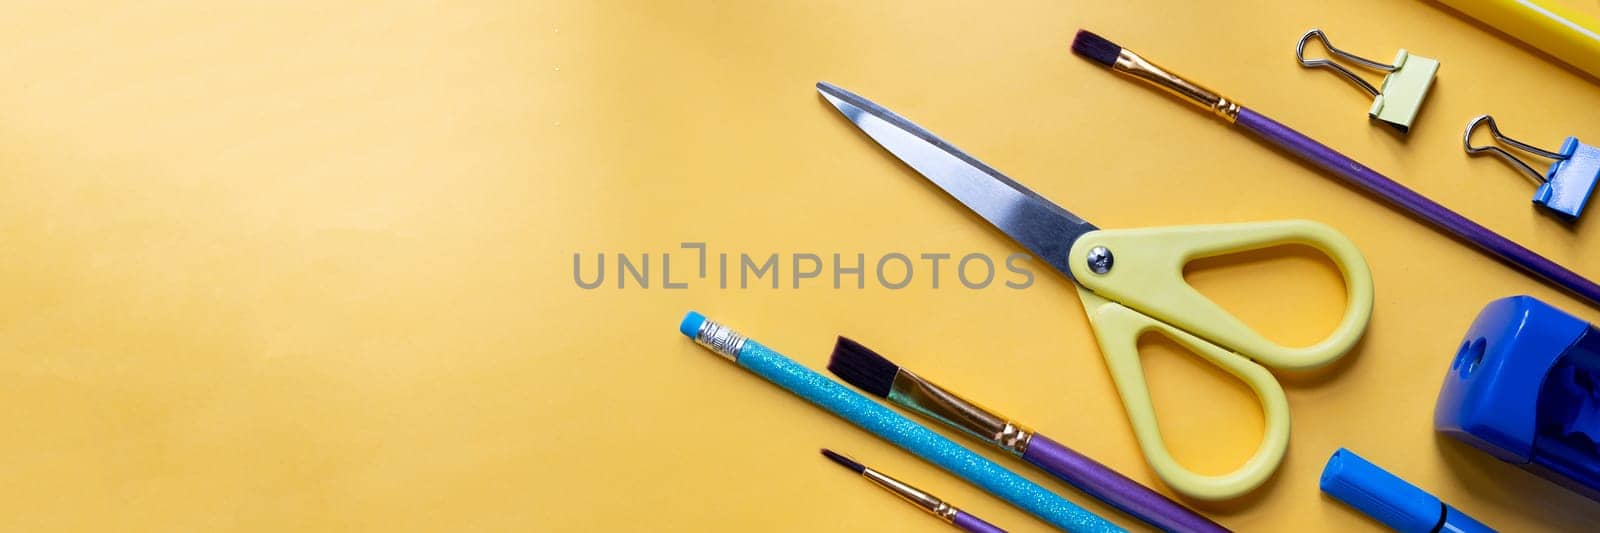 Frame from school and office supplies Paper clips, scissors, pens, felt-tip pens, sharpener, isolated on yellow background. Flat lay.Back to school, education concept.Teacher's Day. by YuliaYaspe1979